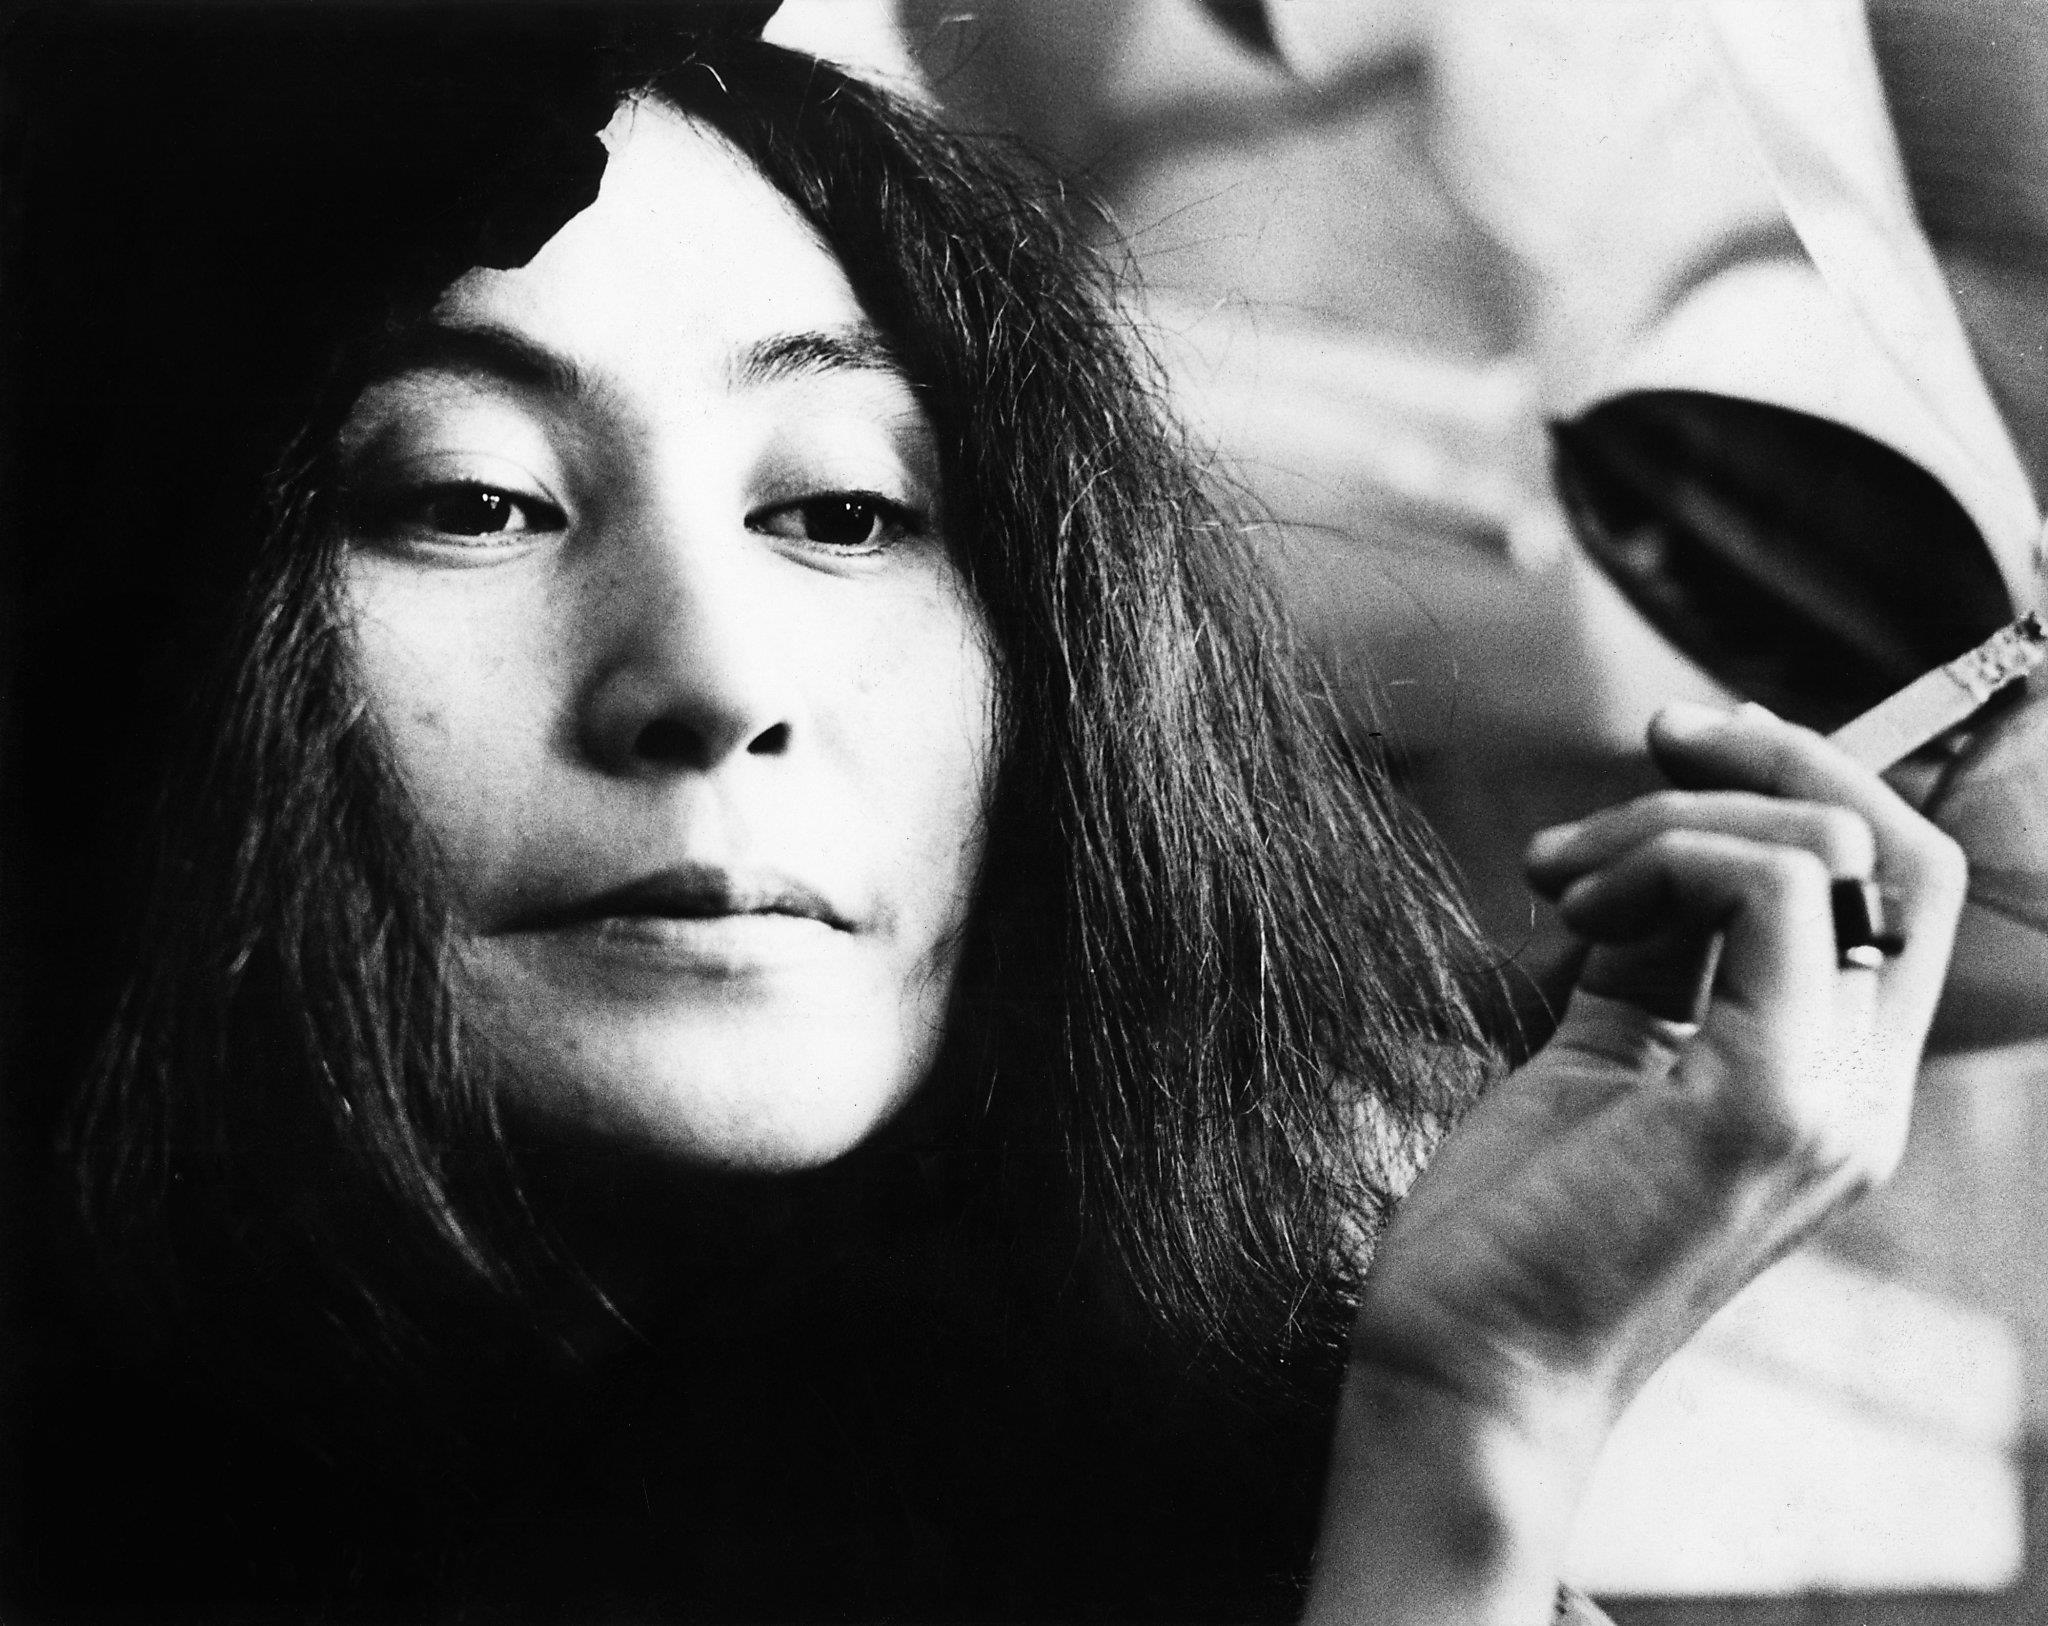  Yoko Ono Hits Back With Rerelease Of 1970s Albums SFChronicle